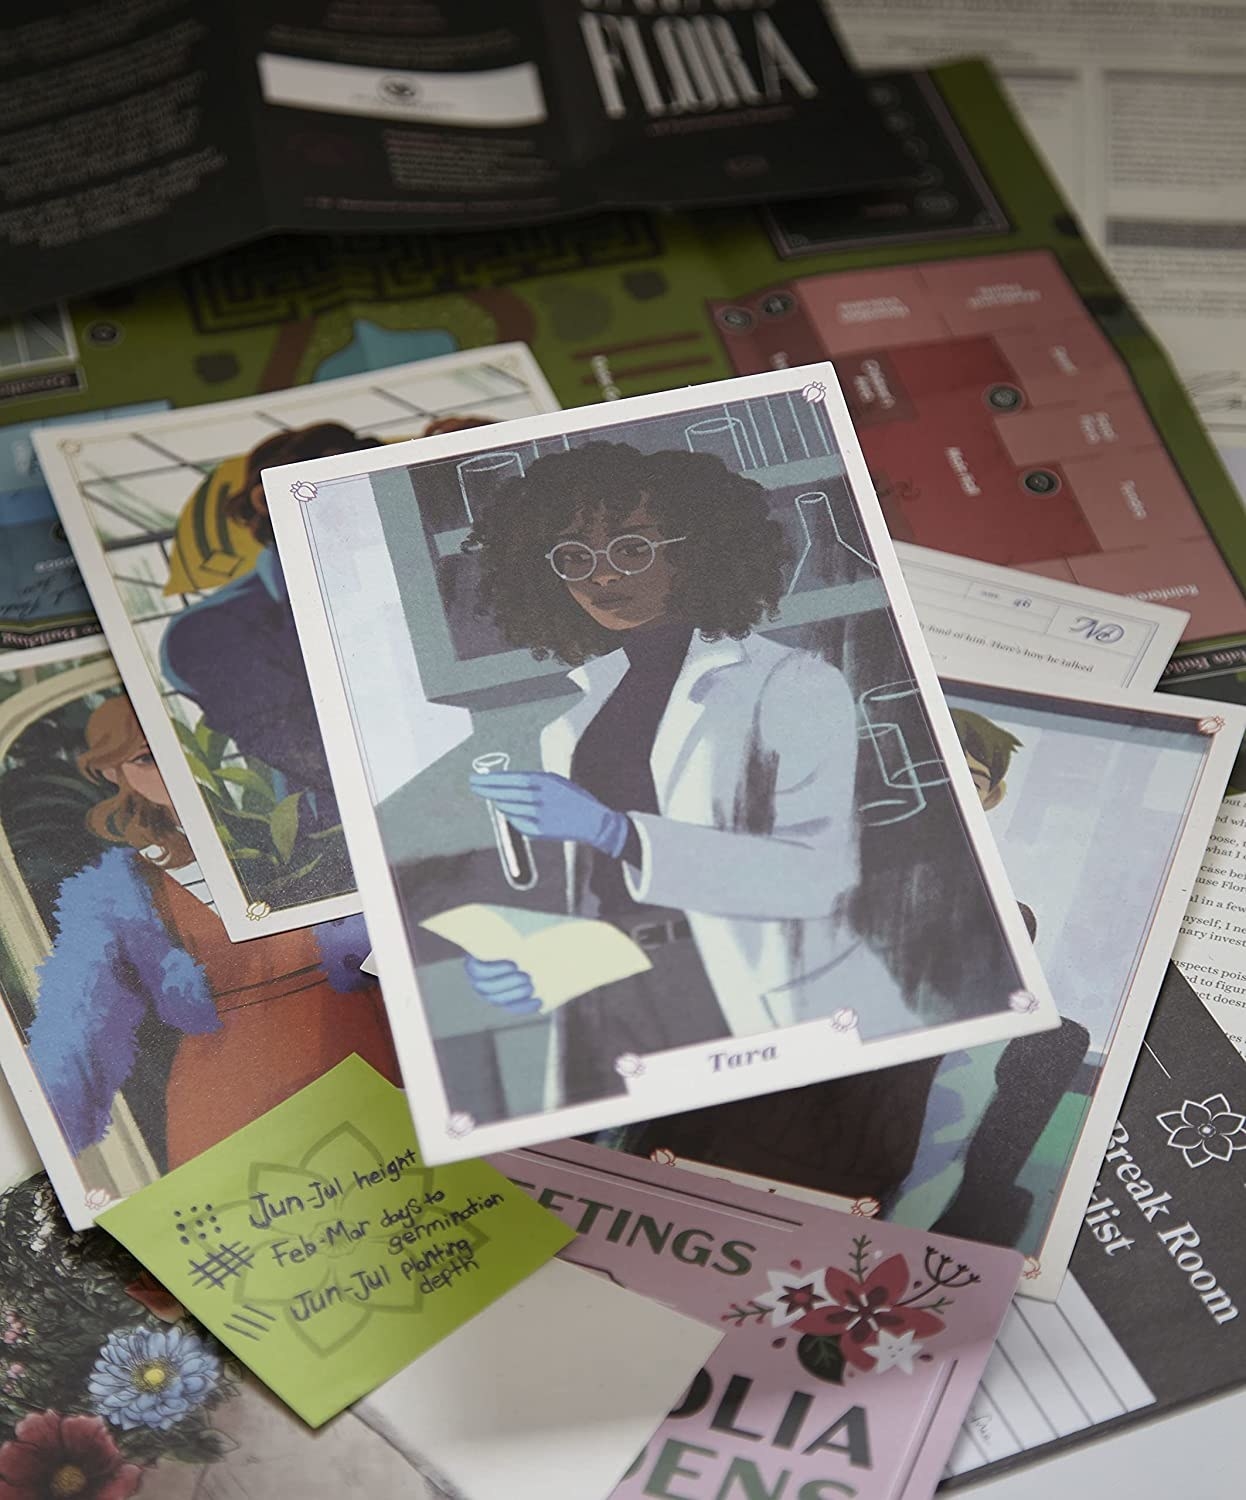 cards from the nancy drew mystery game